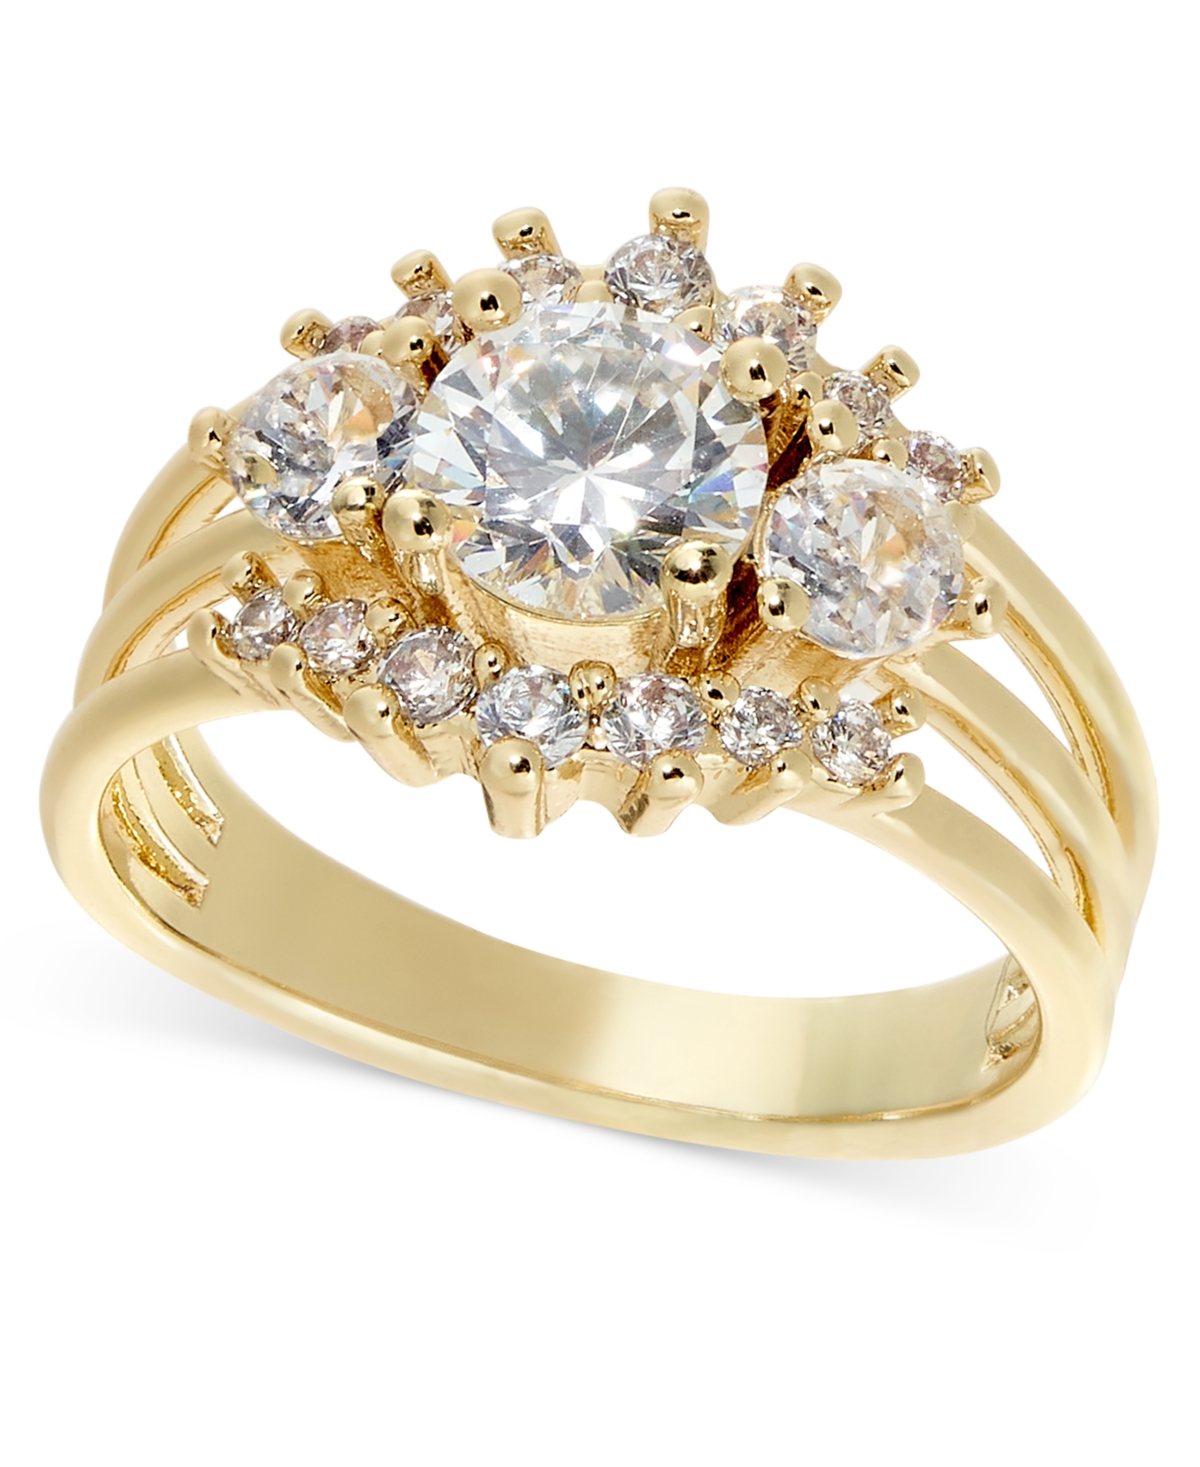 Gold-Tone Crystal Three-Row Band Ring, Created for Macy's - Gold